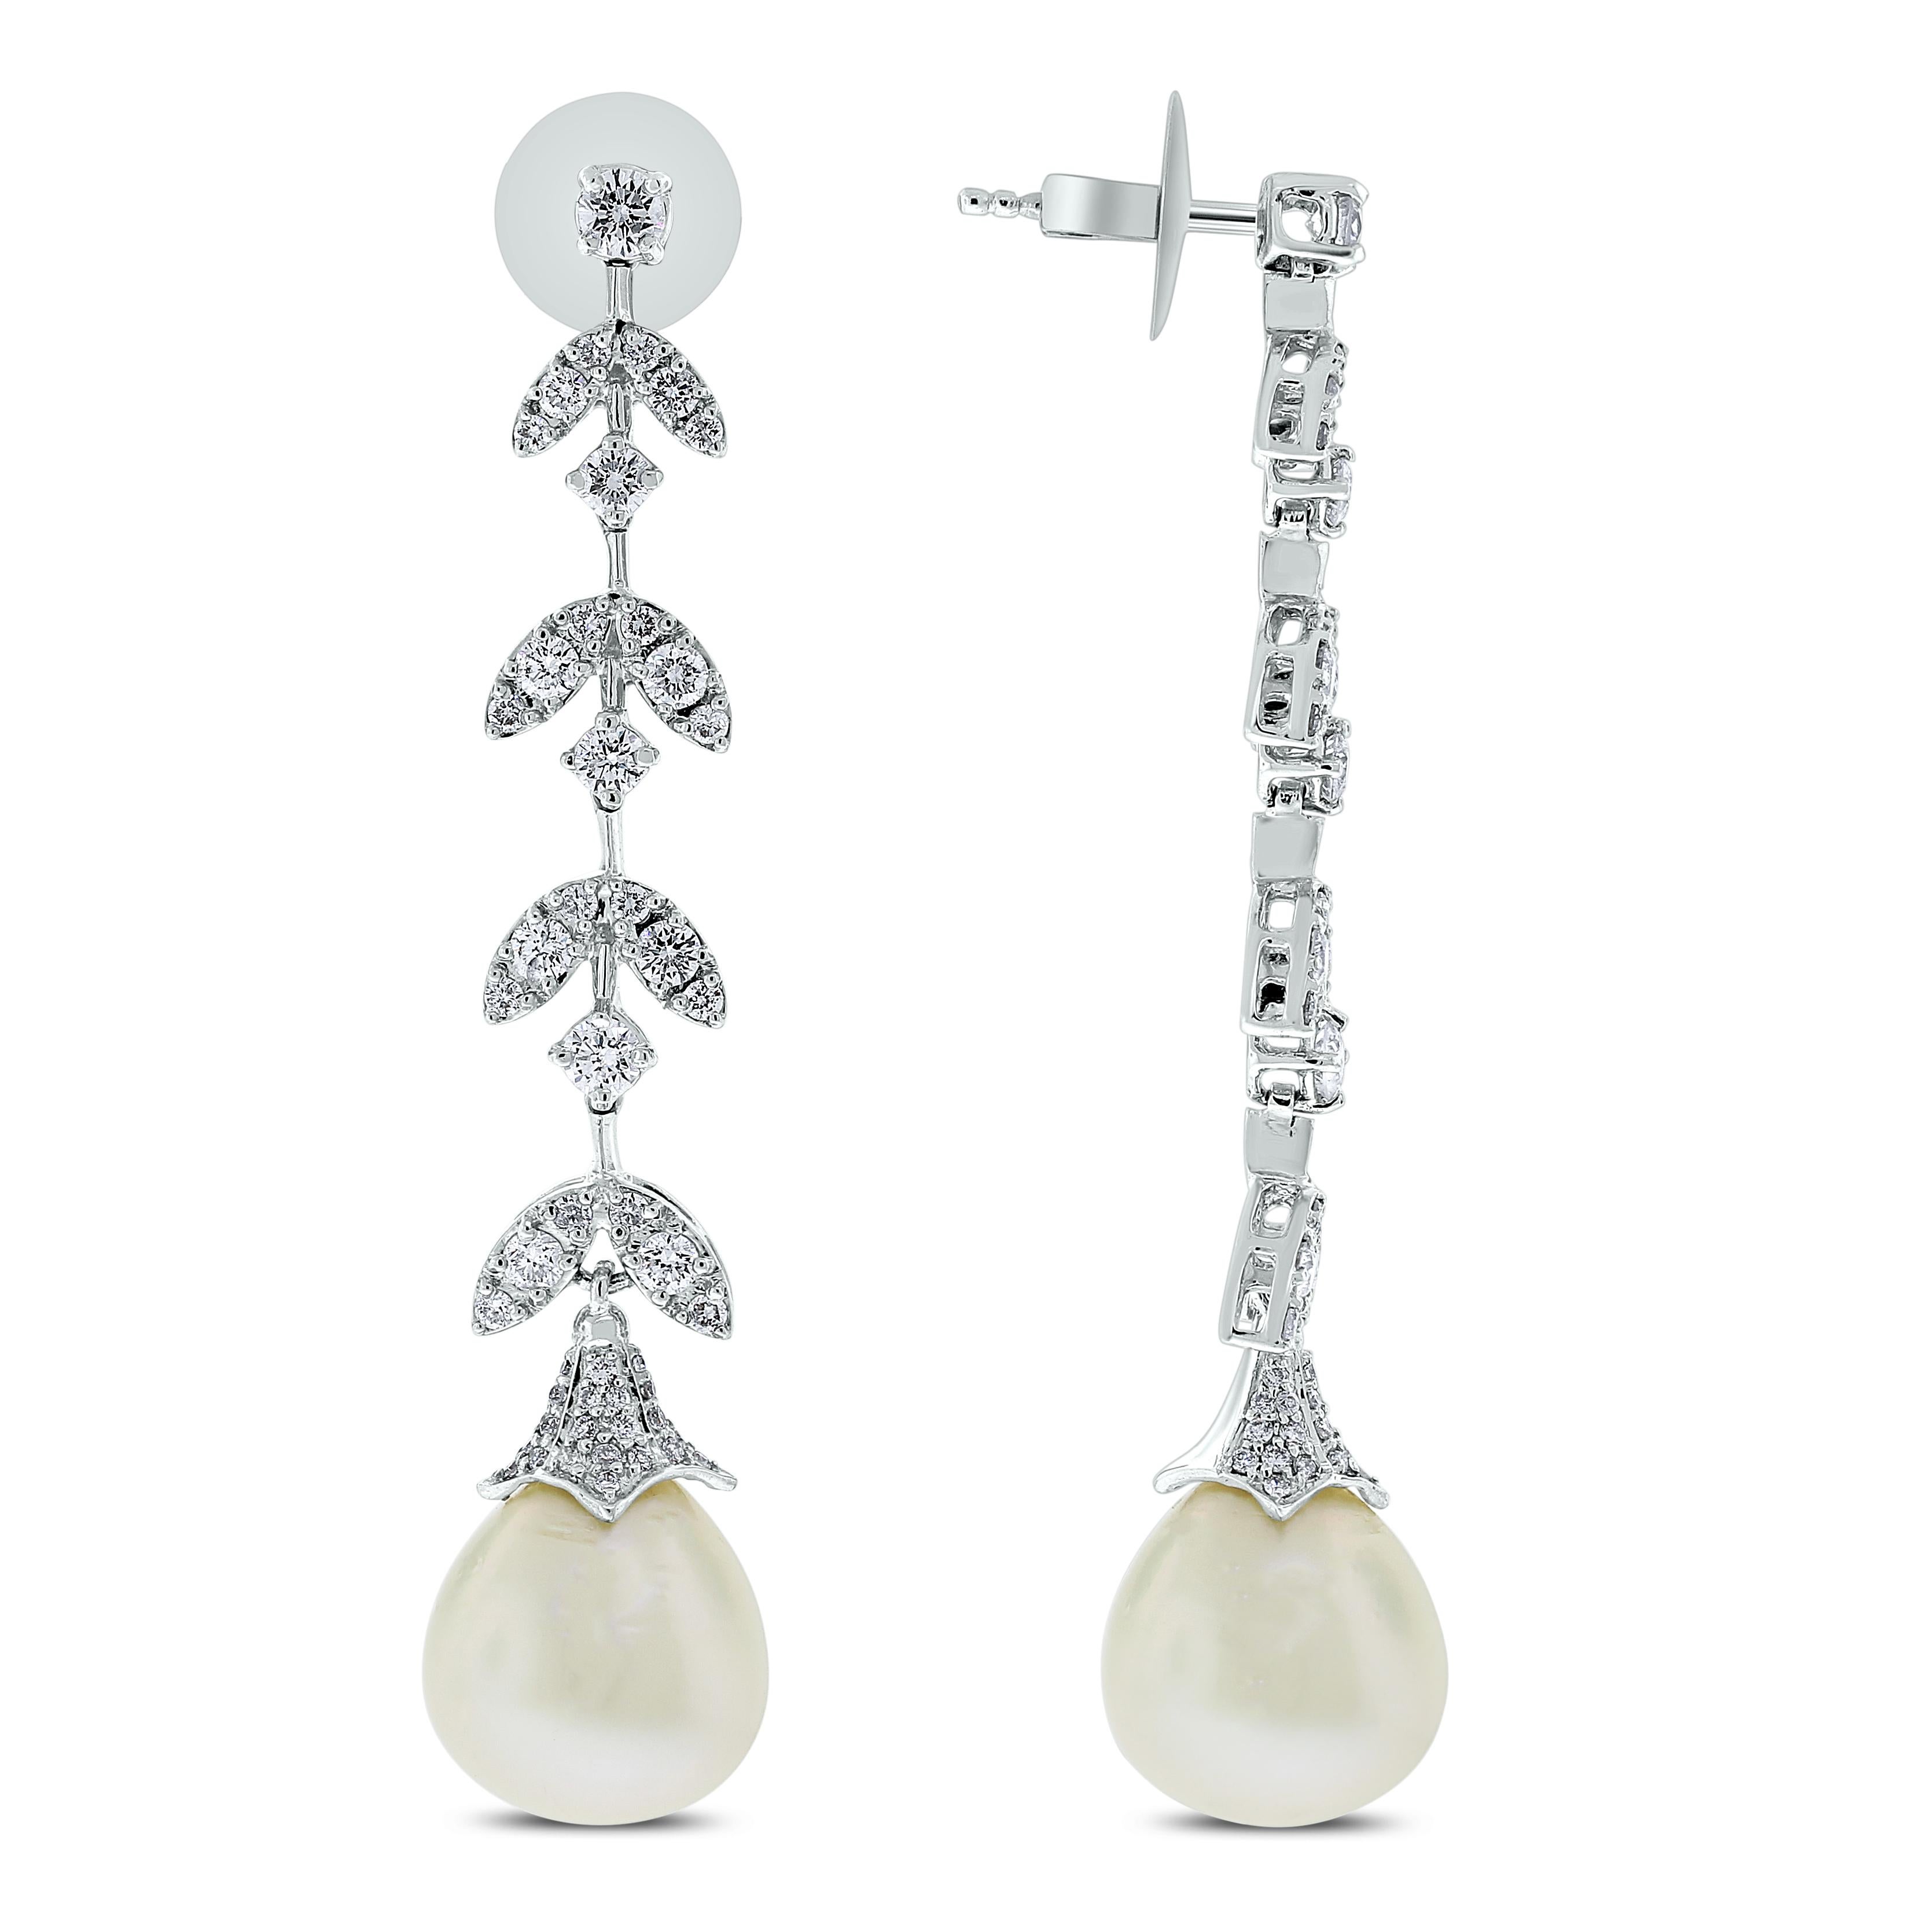 A timeless classic, the Diamond & Pearl Vines Earrings are a fine balance of elegance and flamboyance. 

Gemstones Type: Pearl 
Gemstone Origin: South Sea 
Gemstones Shape: Drop Shape 
Gemstones Weight: 33.12 ct
Gemstones Color: White 

Diamonds